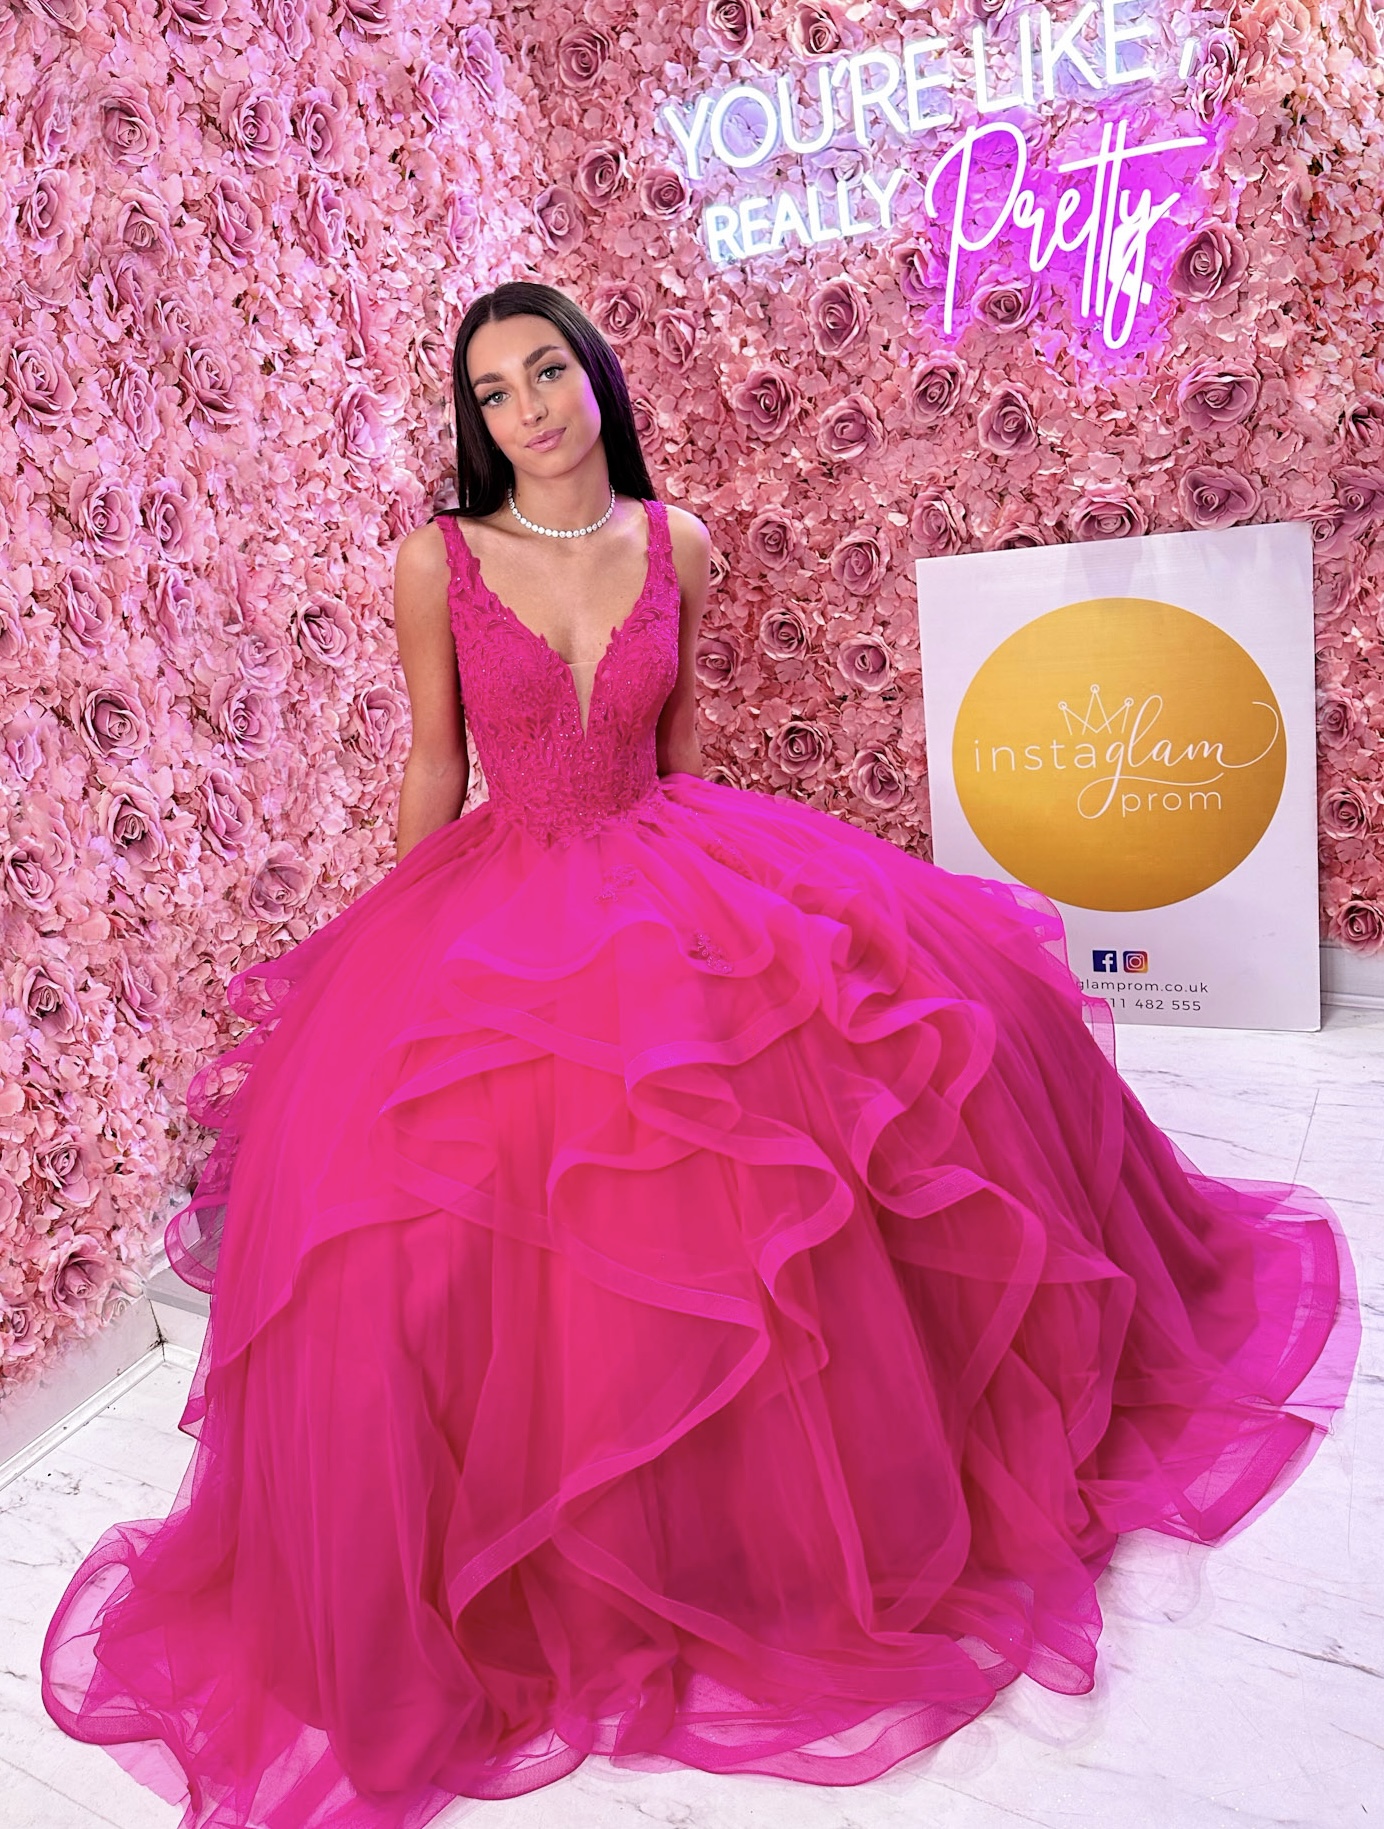 Instaglam Prom – The best place to buy prom dresses